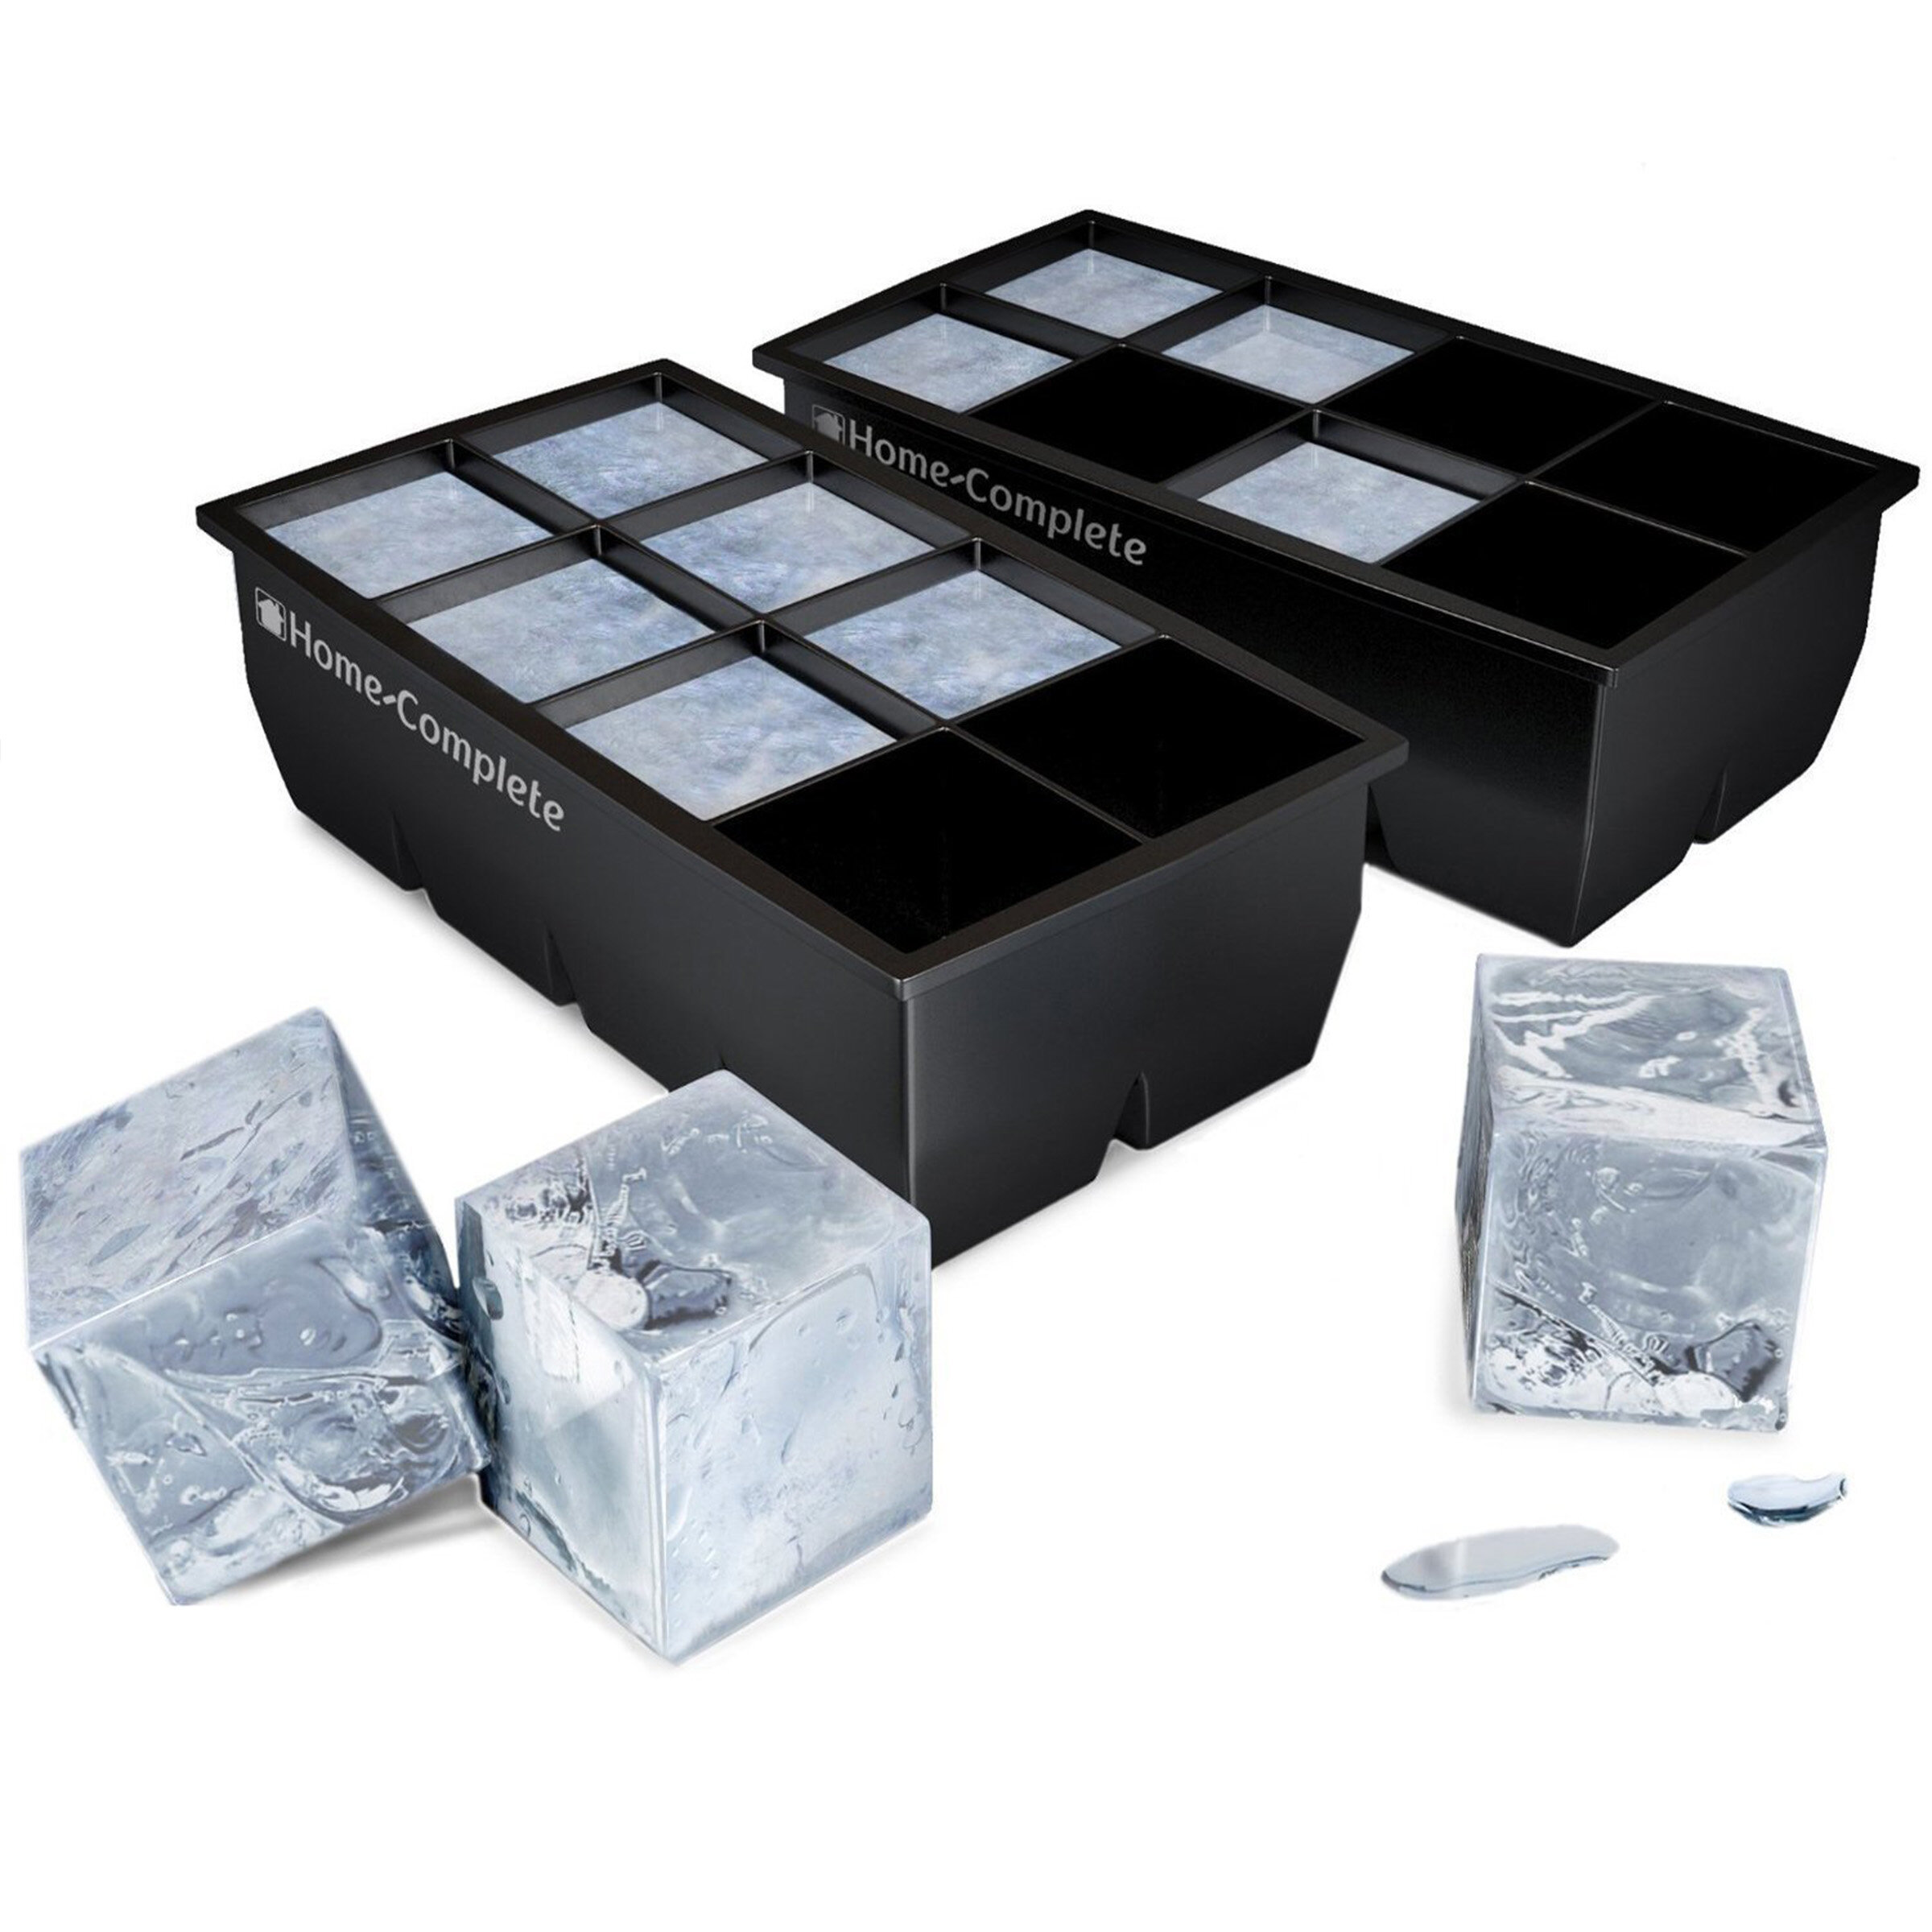 Large Cube Silicone Ice Tray, Giant 2 Inch Ice Cubes Keep Your Drink Cooled  for Hours